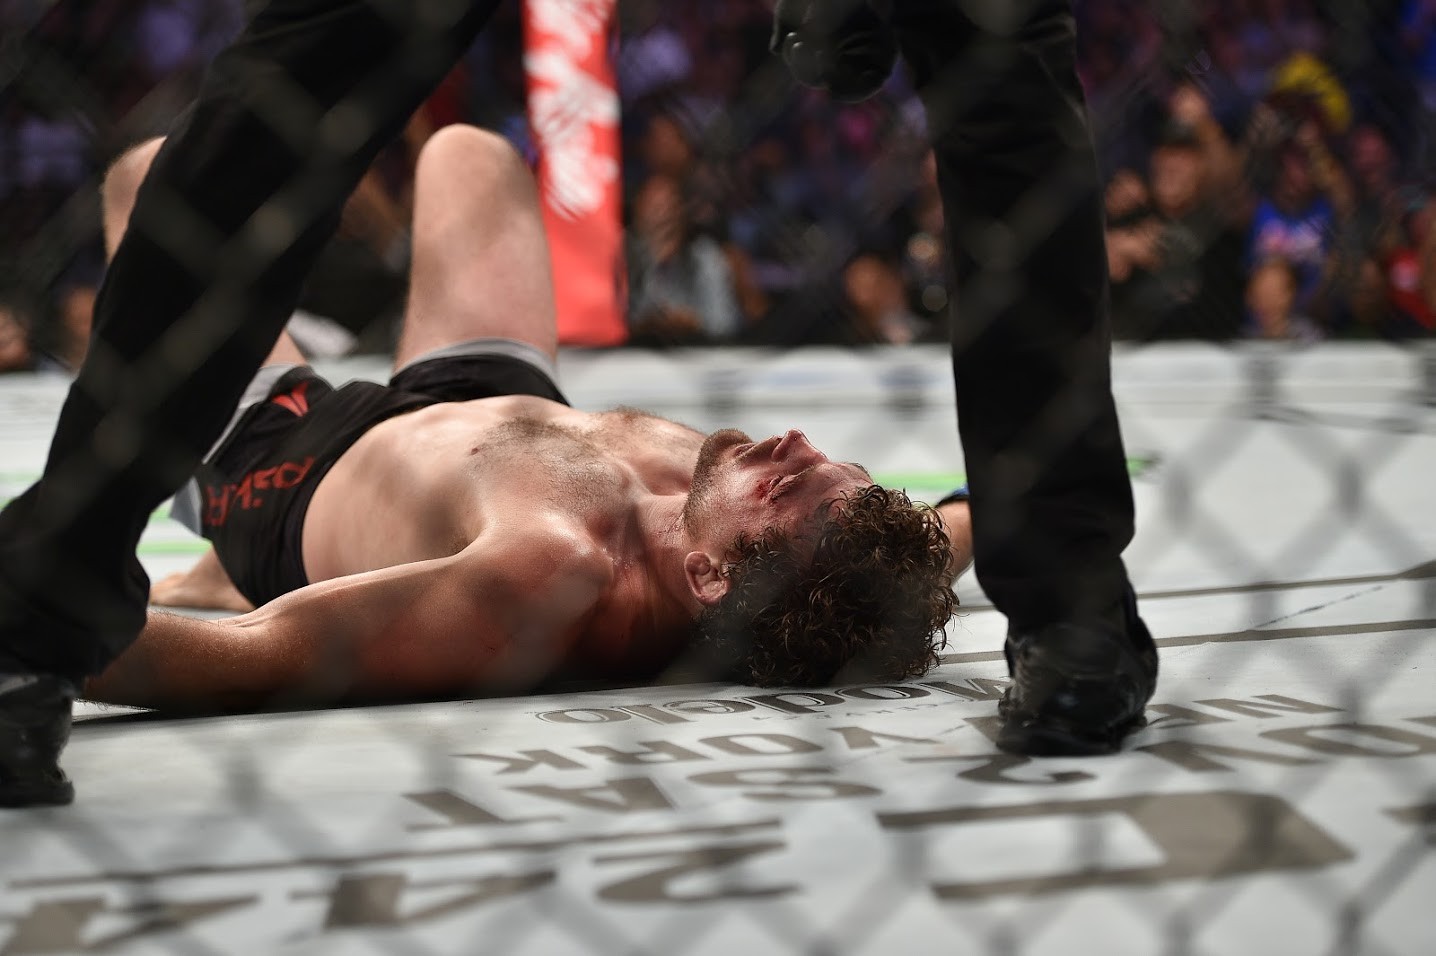 Ben Askren lies down on the canvas after tapping out to Demian Maia. Photos: SingaporeMaven